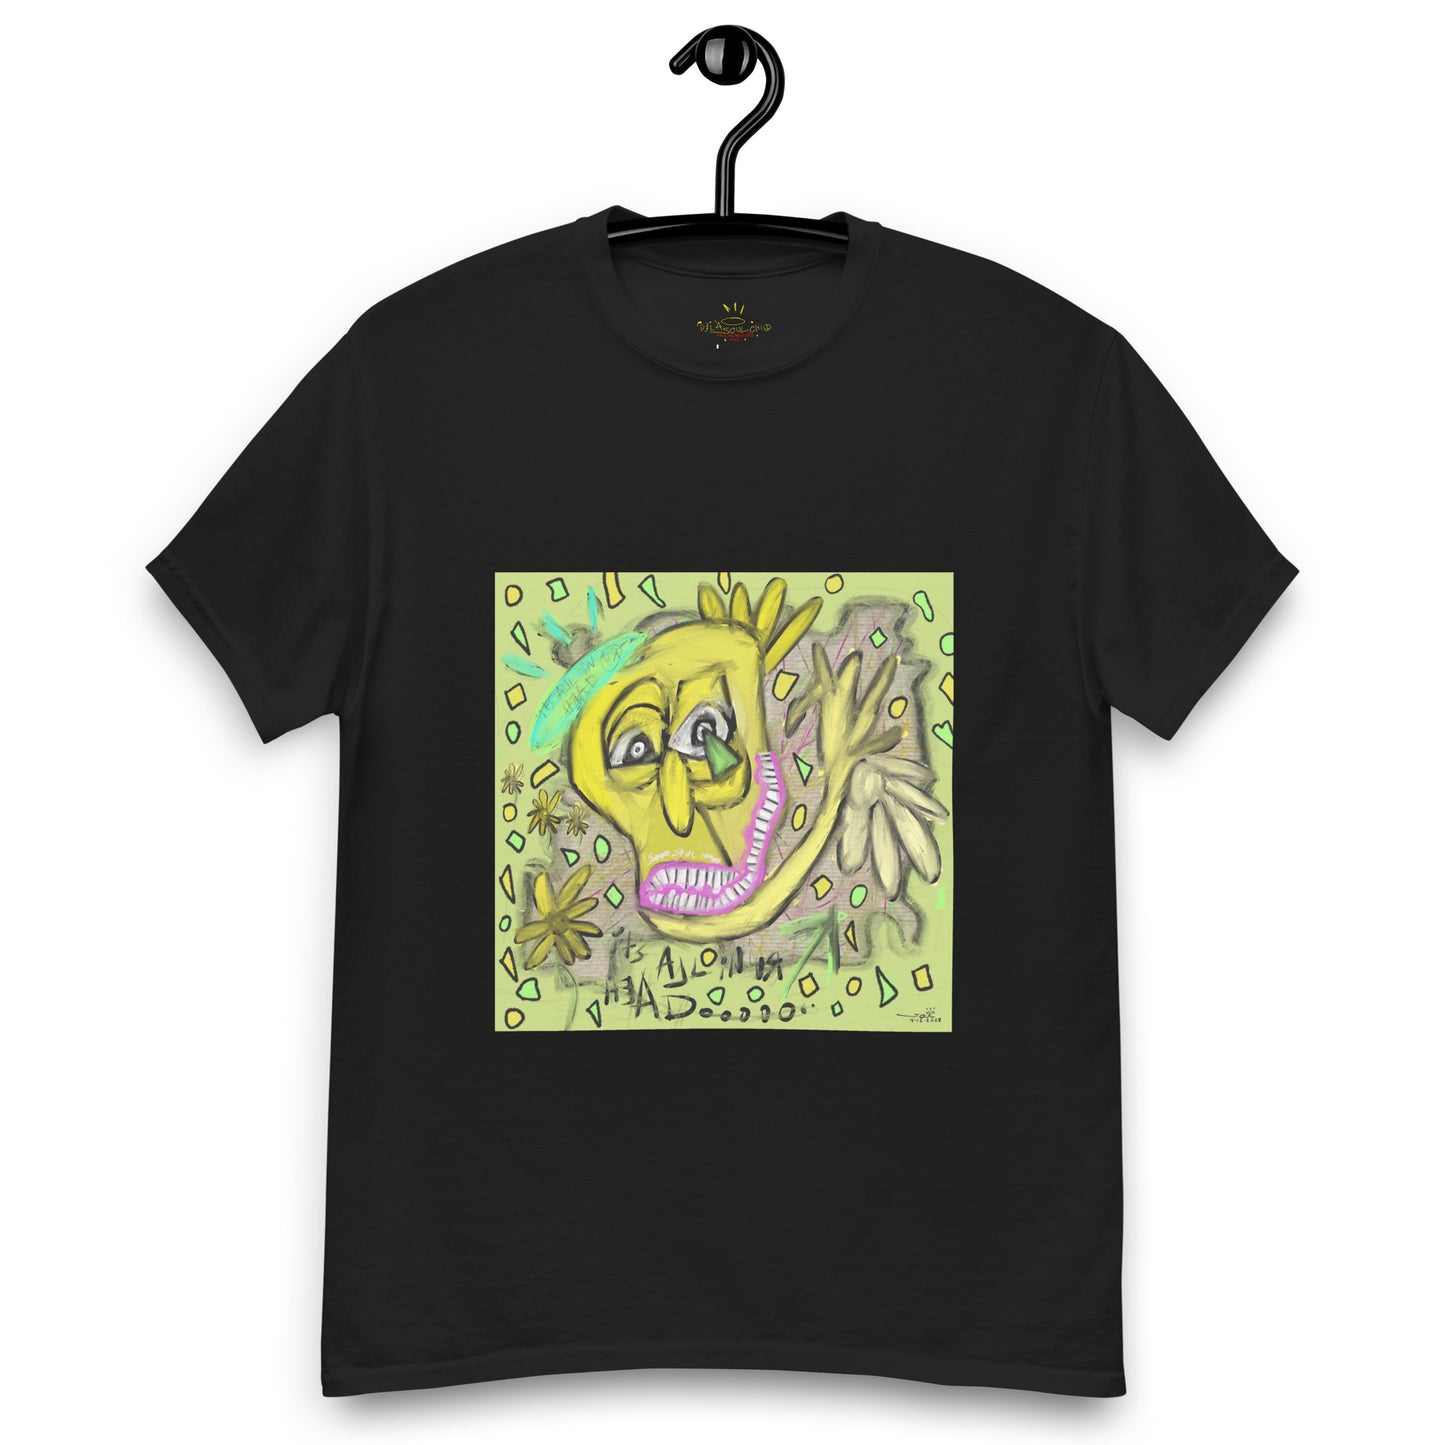 It's All in Your Head #1 - Collectible T-Shirt - Based off the original 1/1 Solana NFT Print